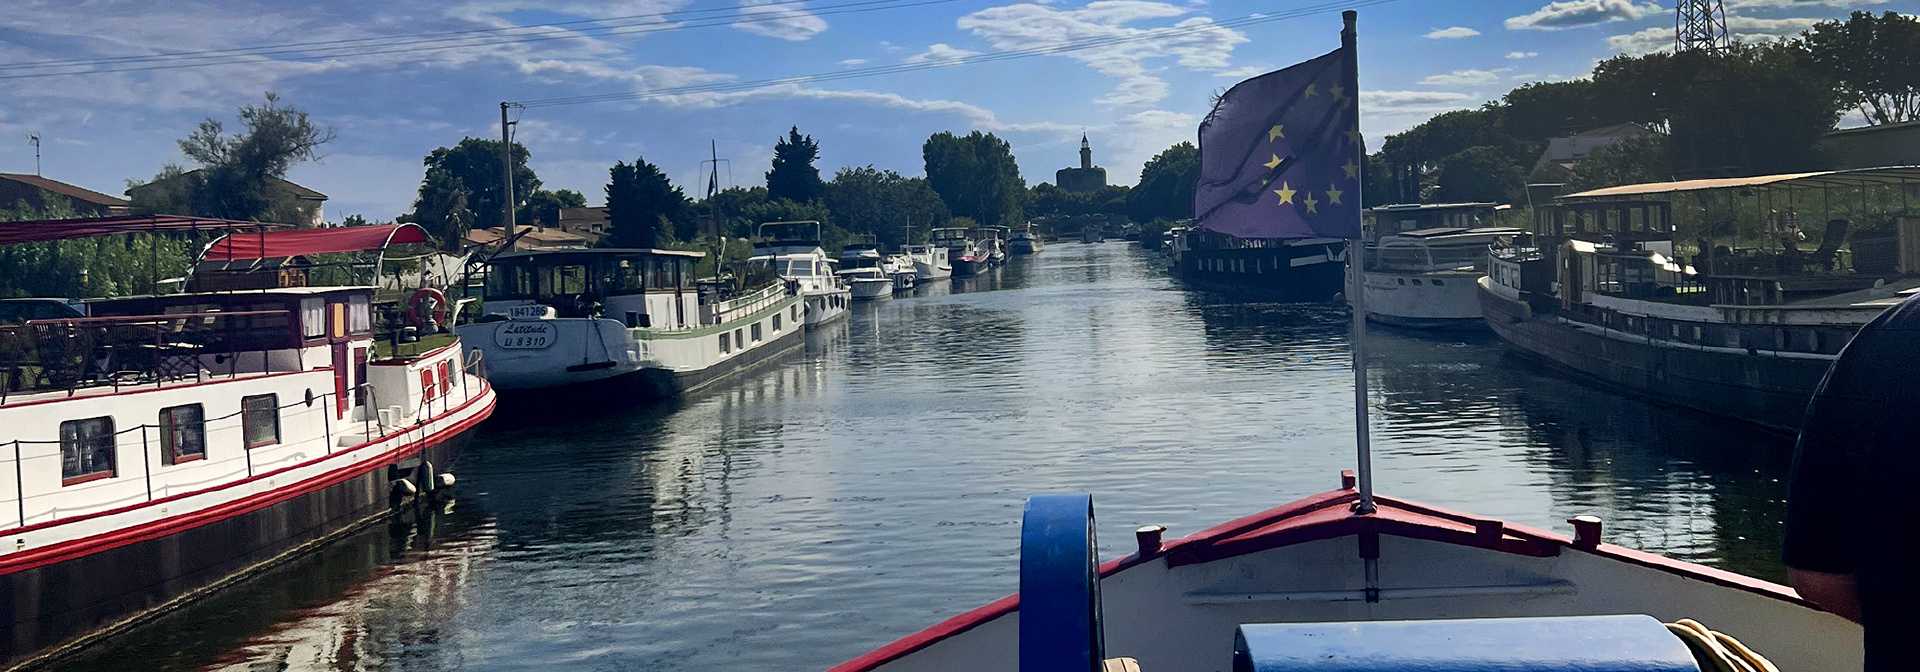 France: Bike and Barge Tour - Aigues-Mortes to Avignon